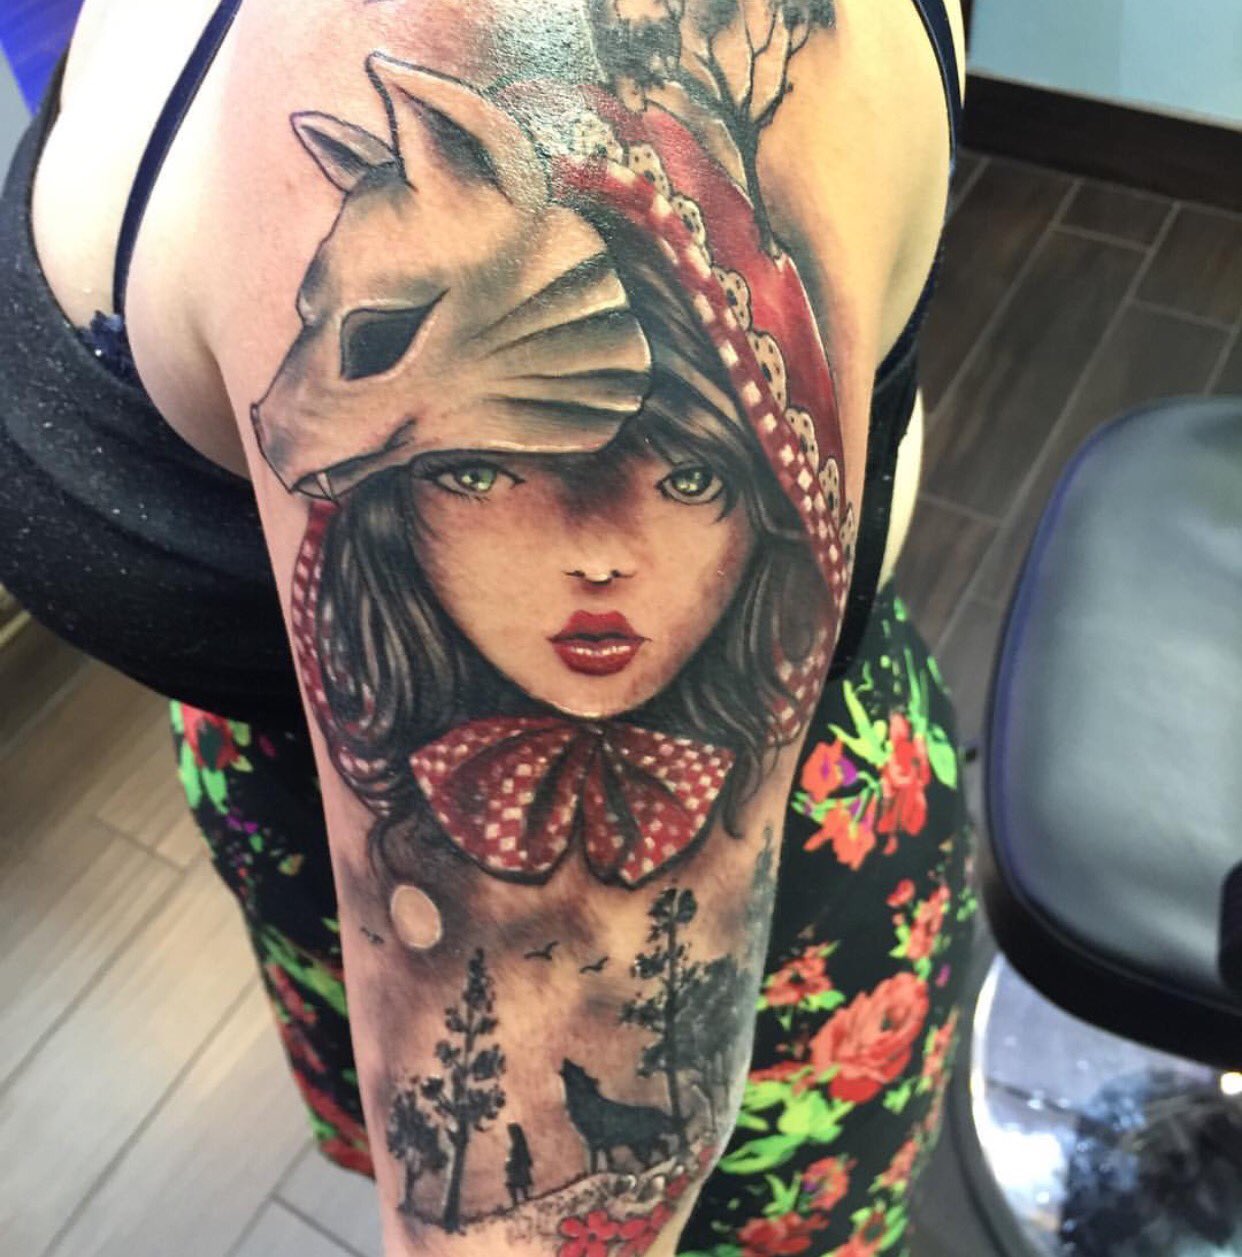 Little Red Riding Hood and the Big Bad Wolf can be seen on a womans back  at the International Tattoo Convention in Frankfurt am Main Germany 21  March 2015 Tattoo artists from